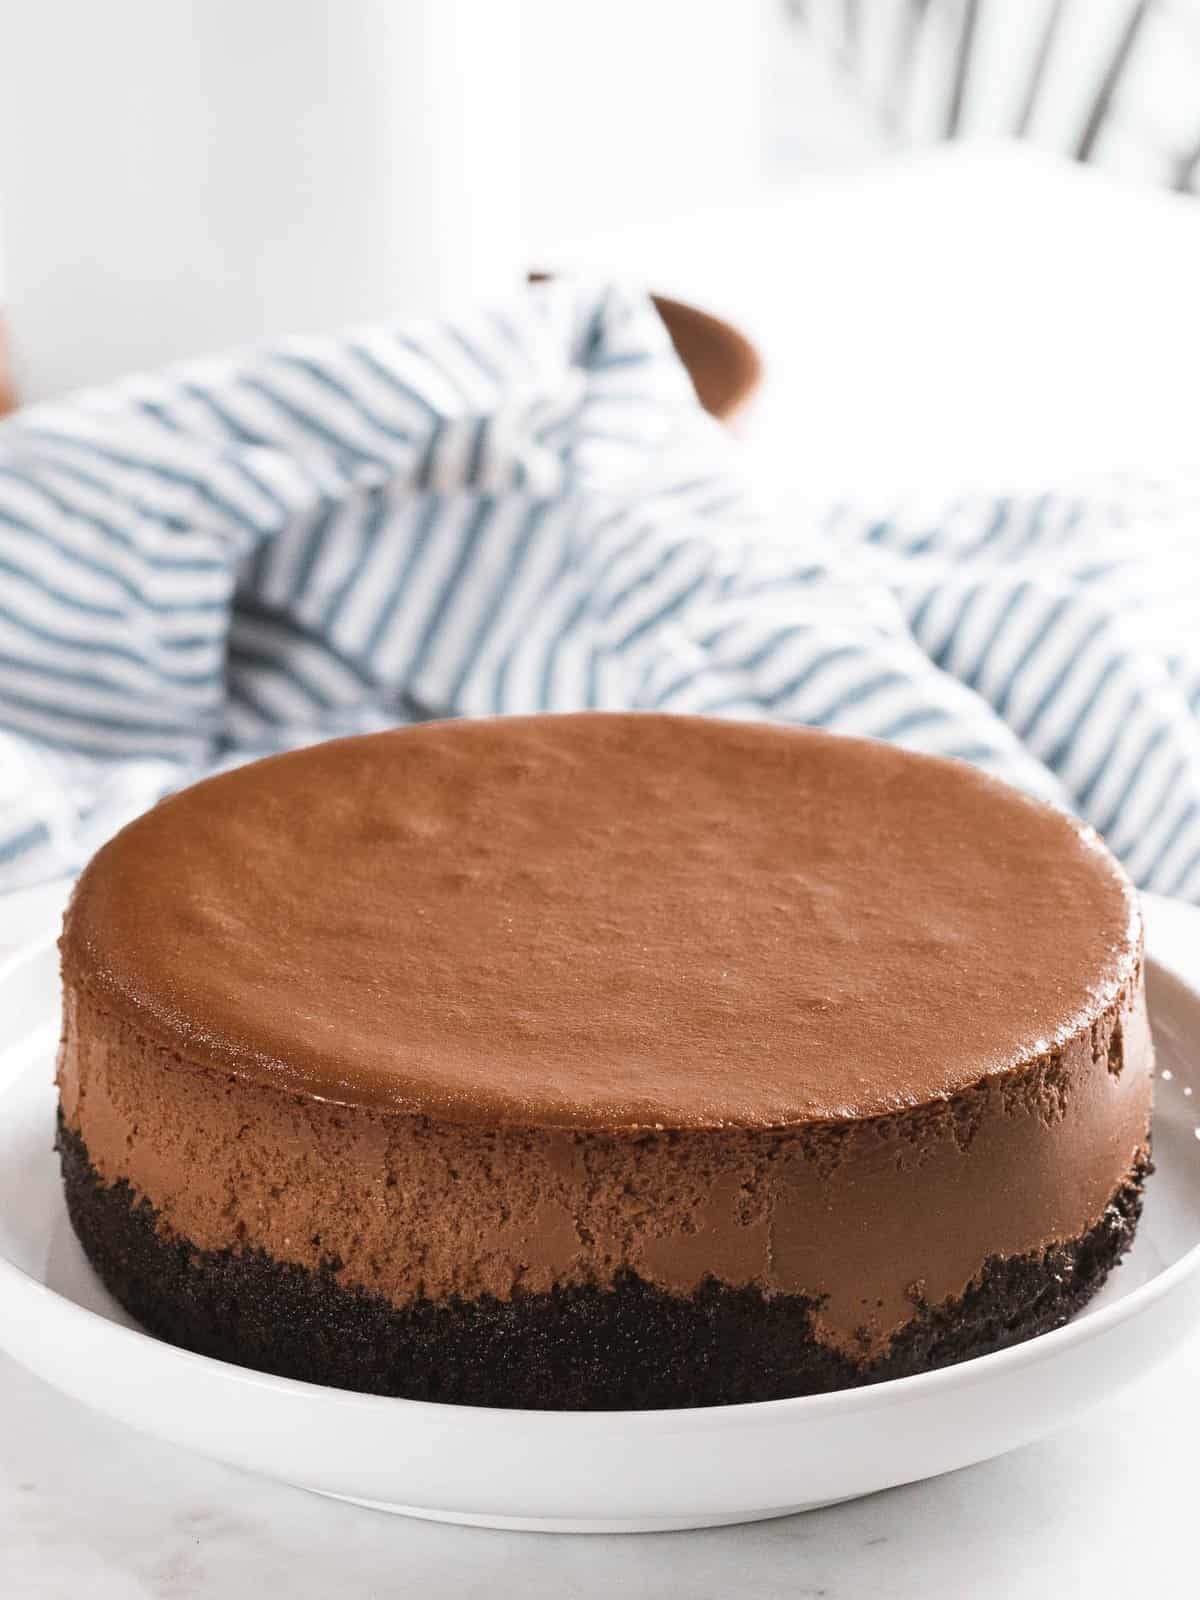 Chocolate cheesecake with chocolate crust on a plate.